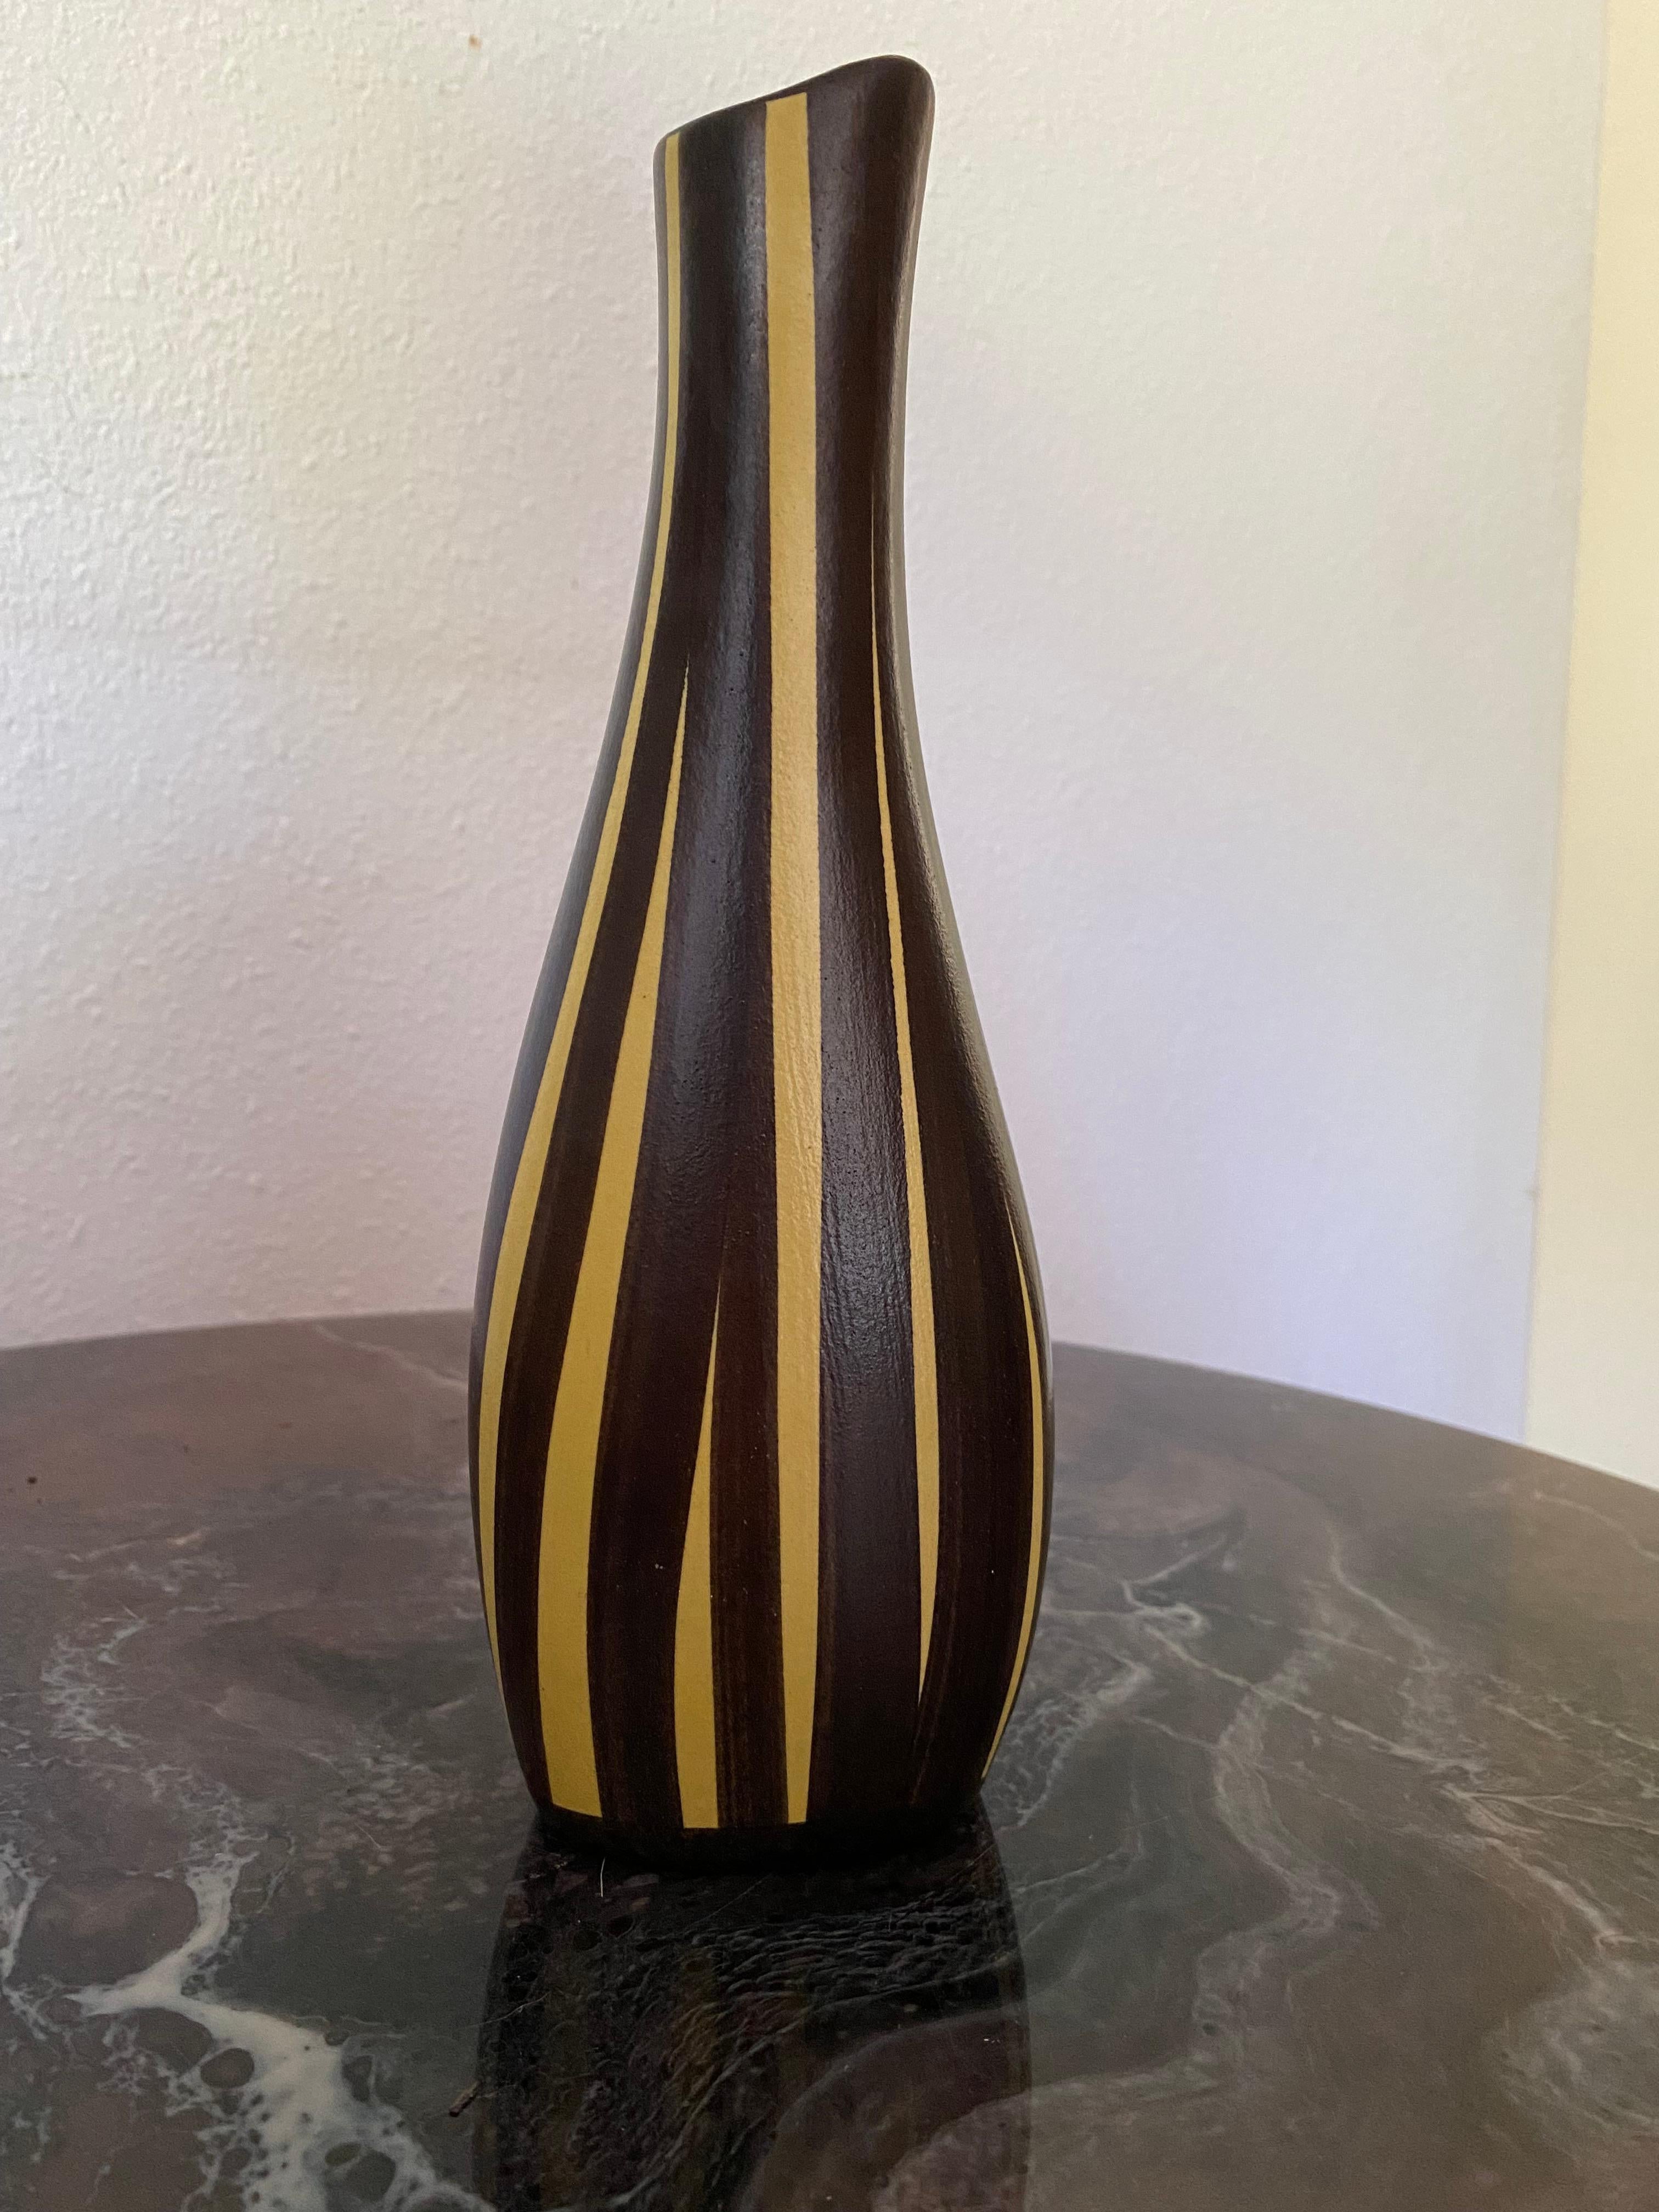 Just a beautiful stylish vase in matte brown with yellow stripes from the sixties